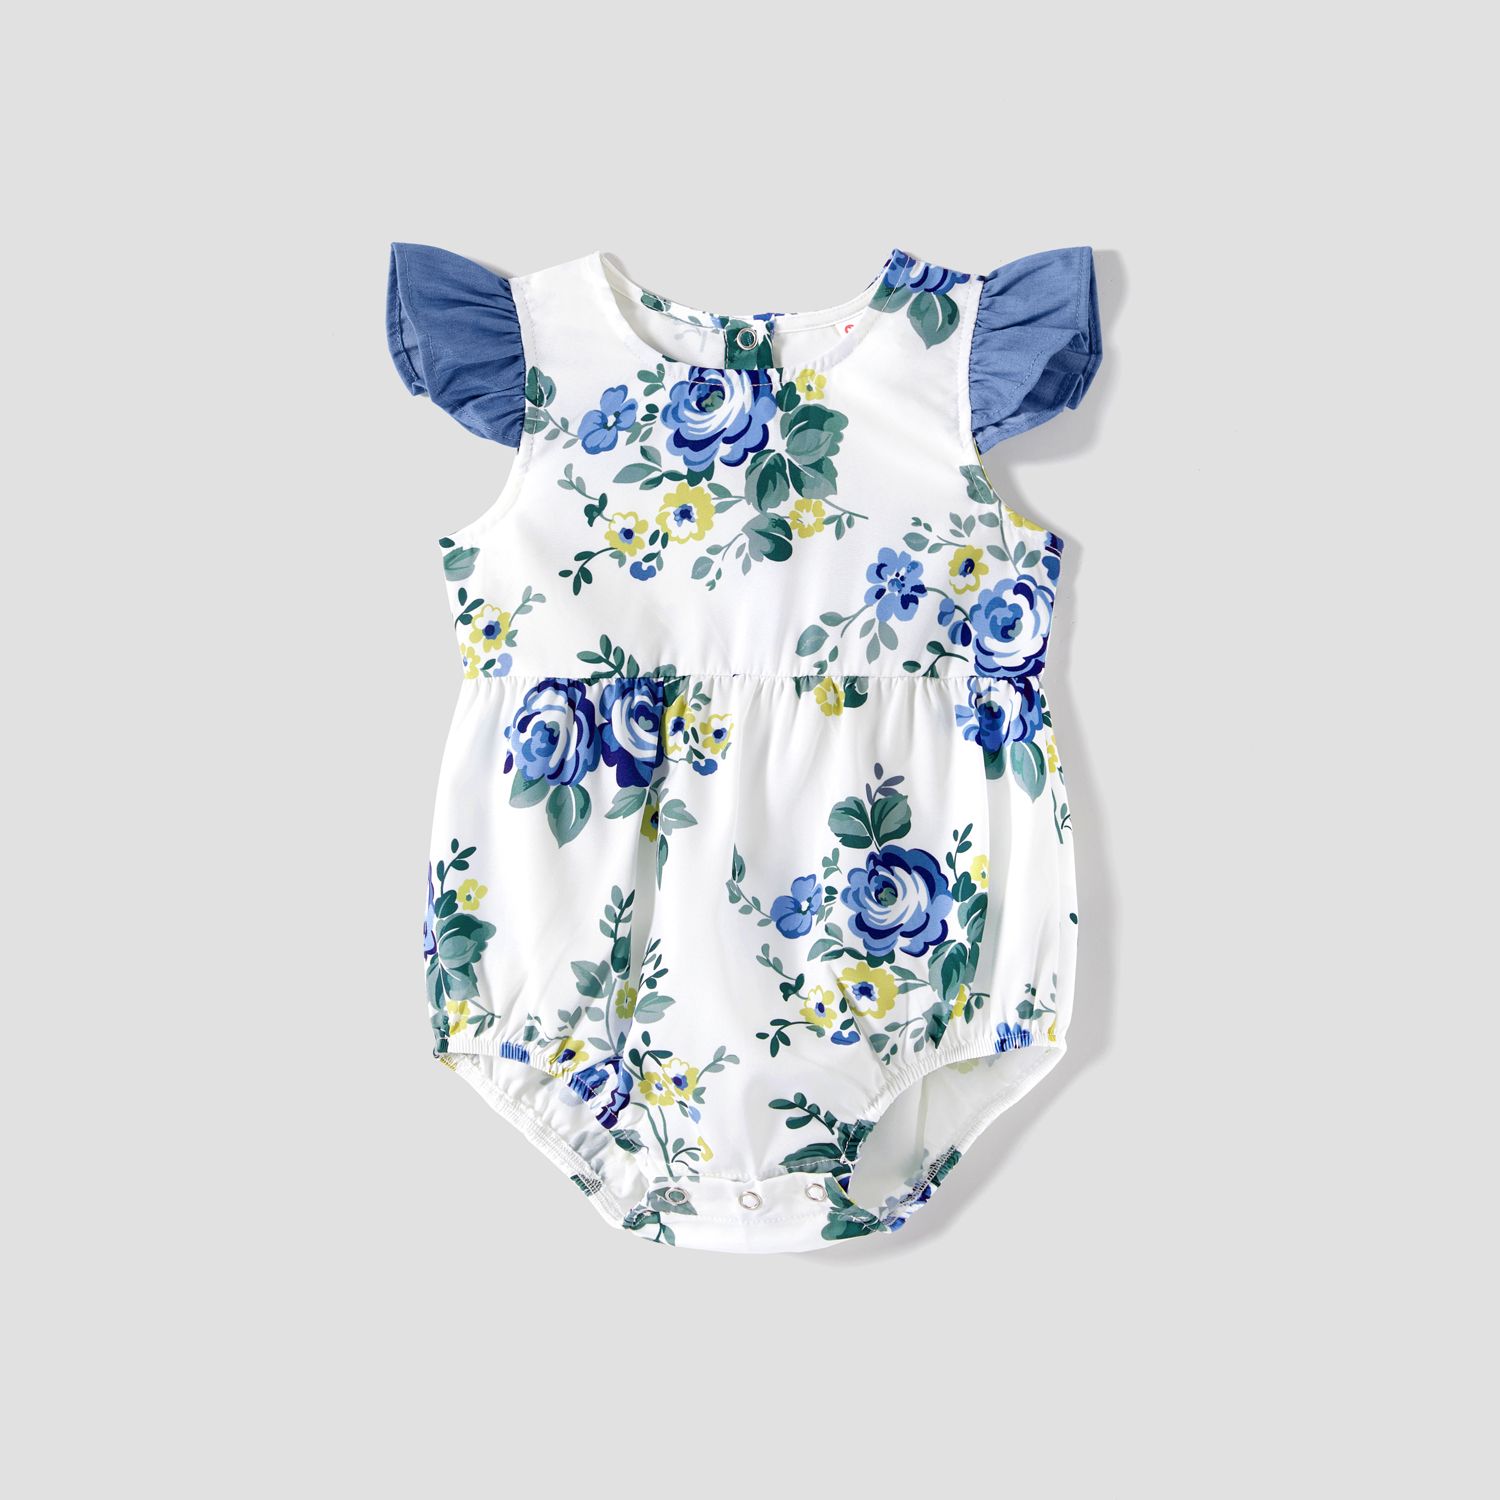 Family Matching 100% Cotton Blue Short-sleeve Shirts and Floral Print Ruffle Trim Spliced Cami Dress